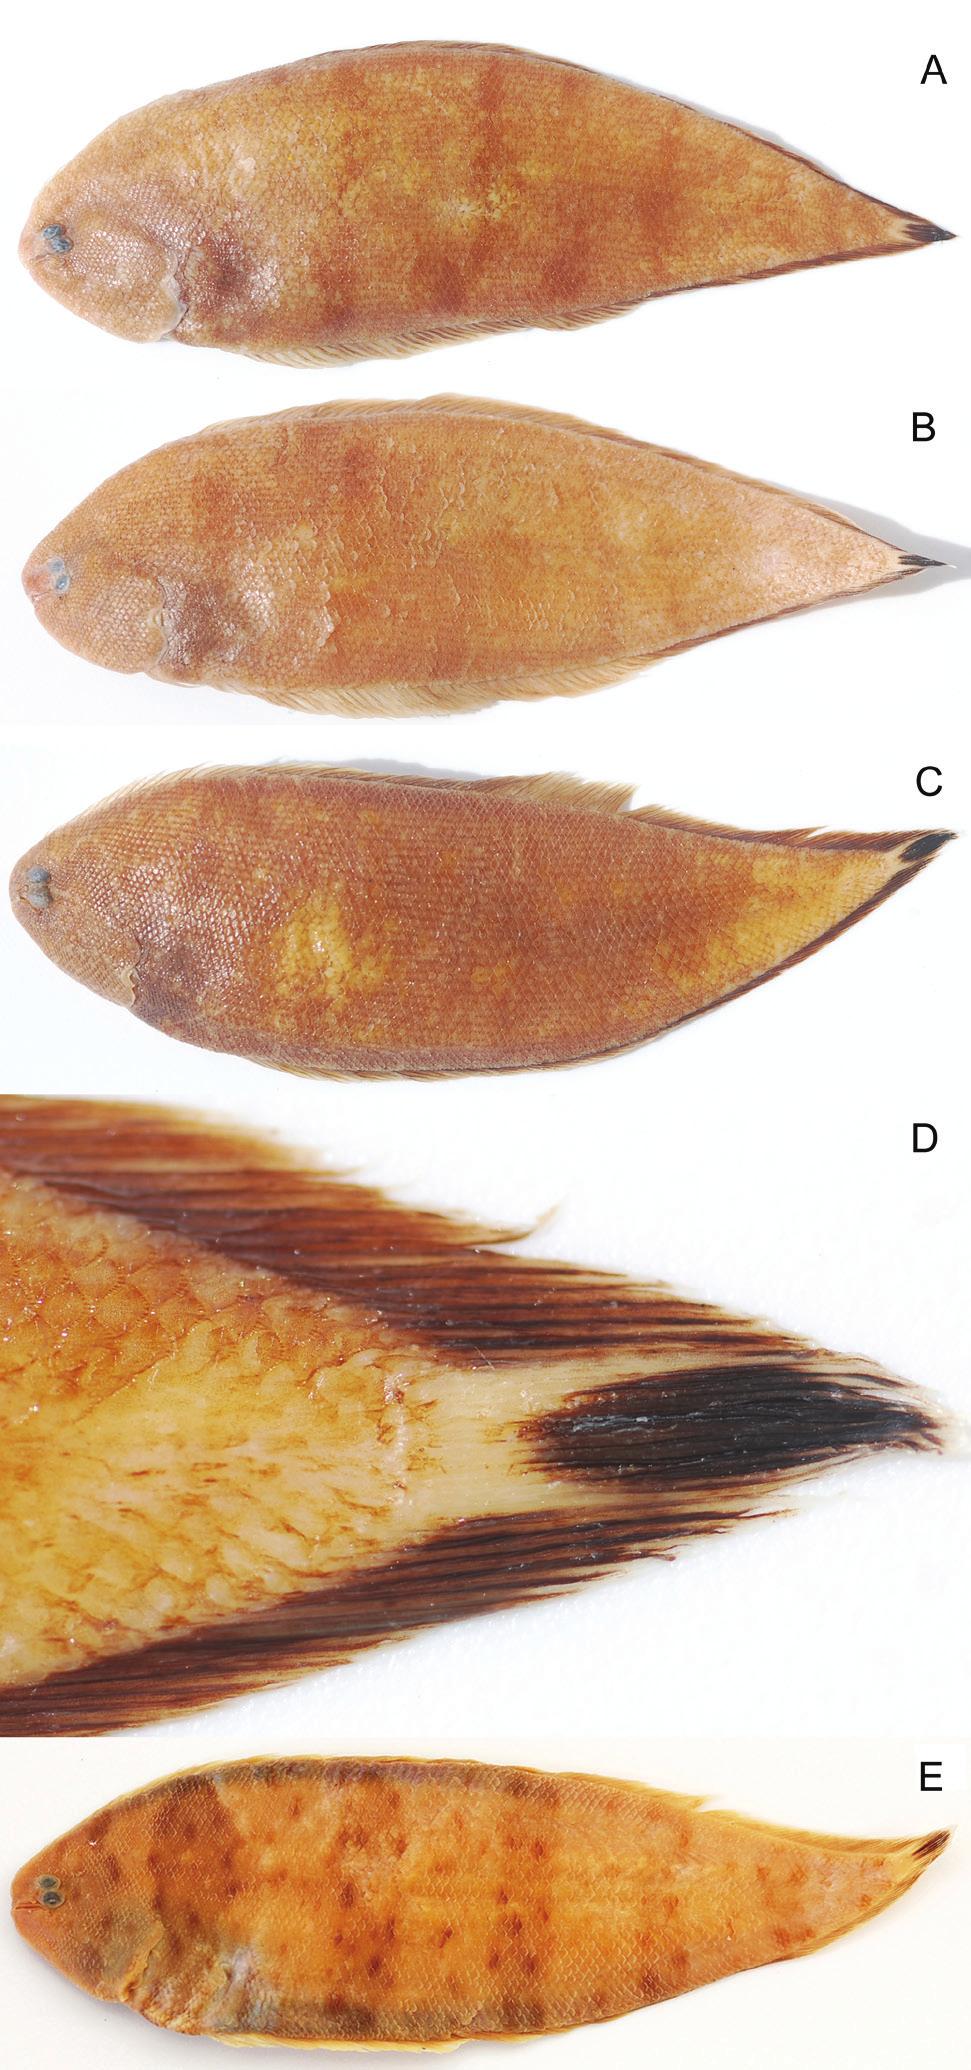 306 van der Heiden et al.- Symphurus ocellaris, a new addition to marine fish fauna pattern of proximal dorsal-fin pterygiophores and neural spines (Tables 1 and 2).